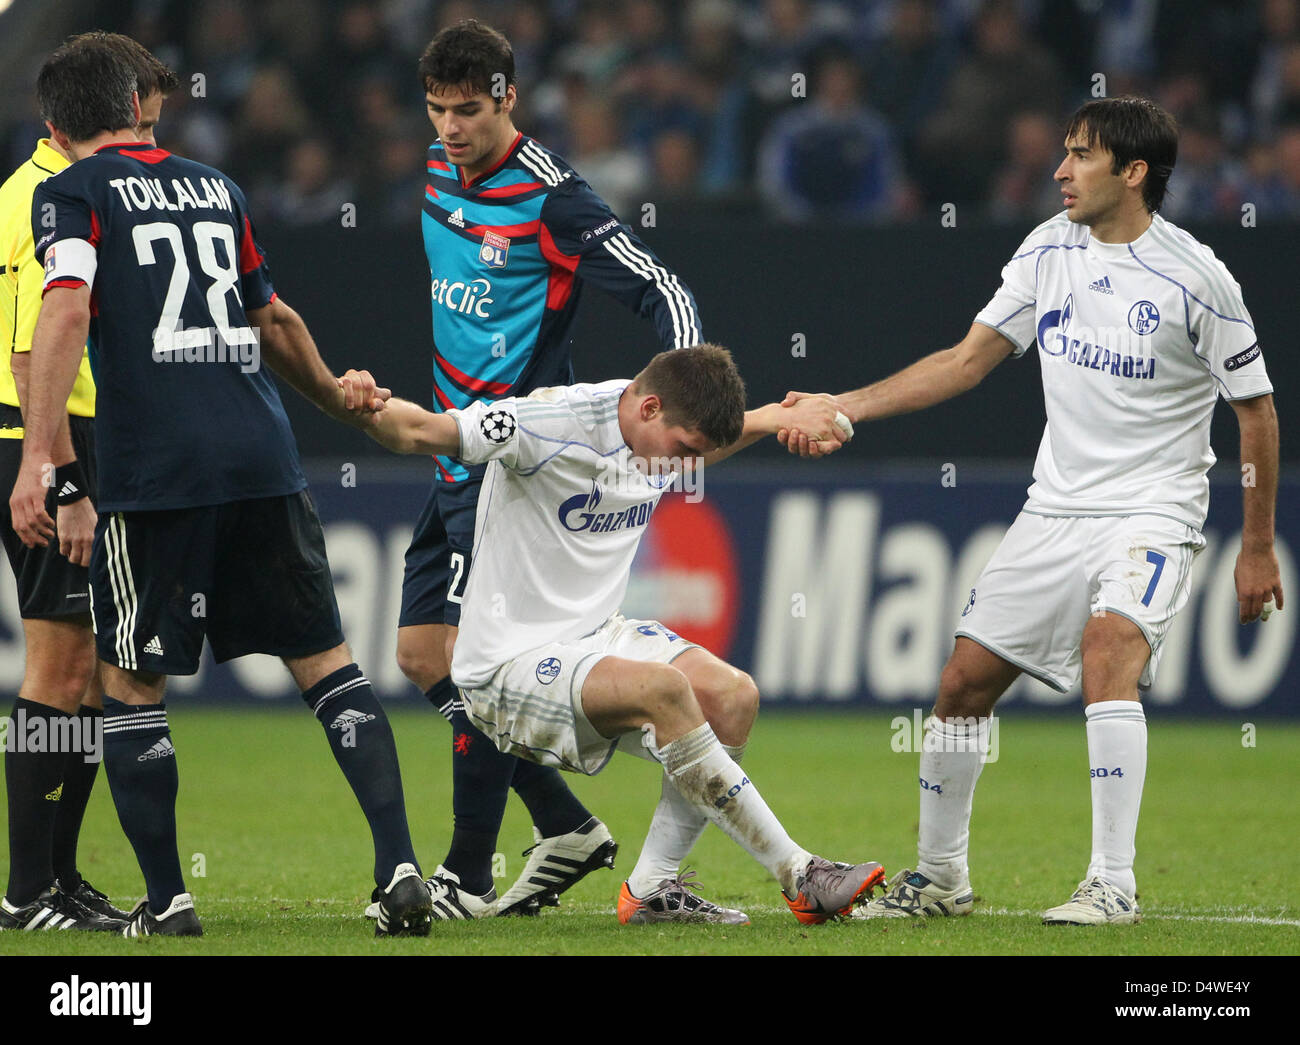 Schalke's Klaas Jan Huntelaar (C) is lifted by Lyon's Jeremy Toulalan (L) and his teammate Raul (R) during their UEFA Champions League group B match FC Schalke 04 vs Olympique Lyon at Veltins-Arena stadium in Gelsenkirchen, Germany, 24 November 2010. Photo: Friso Gentsch Stock Photo